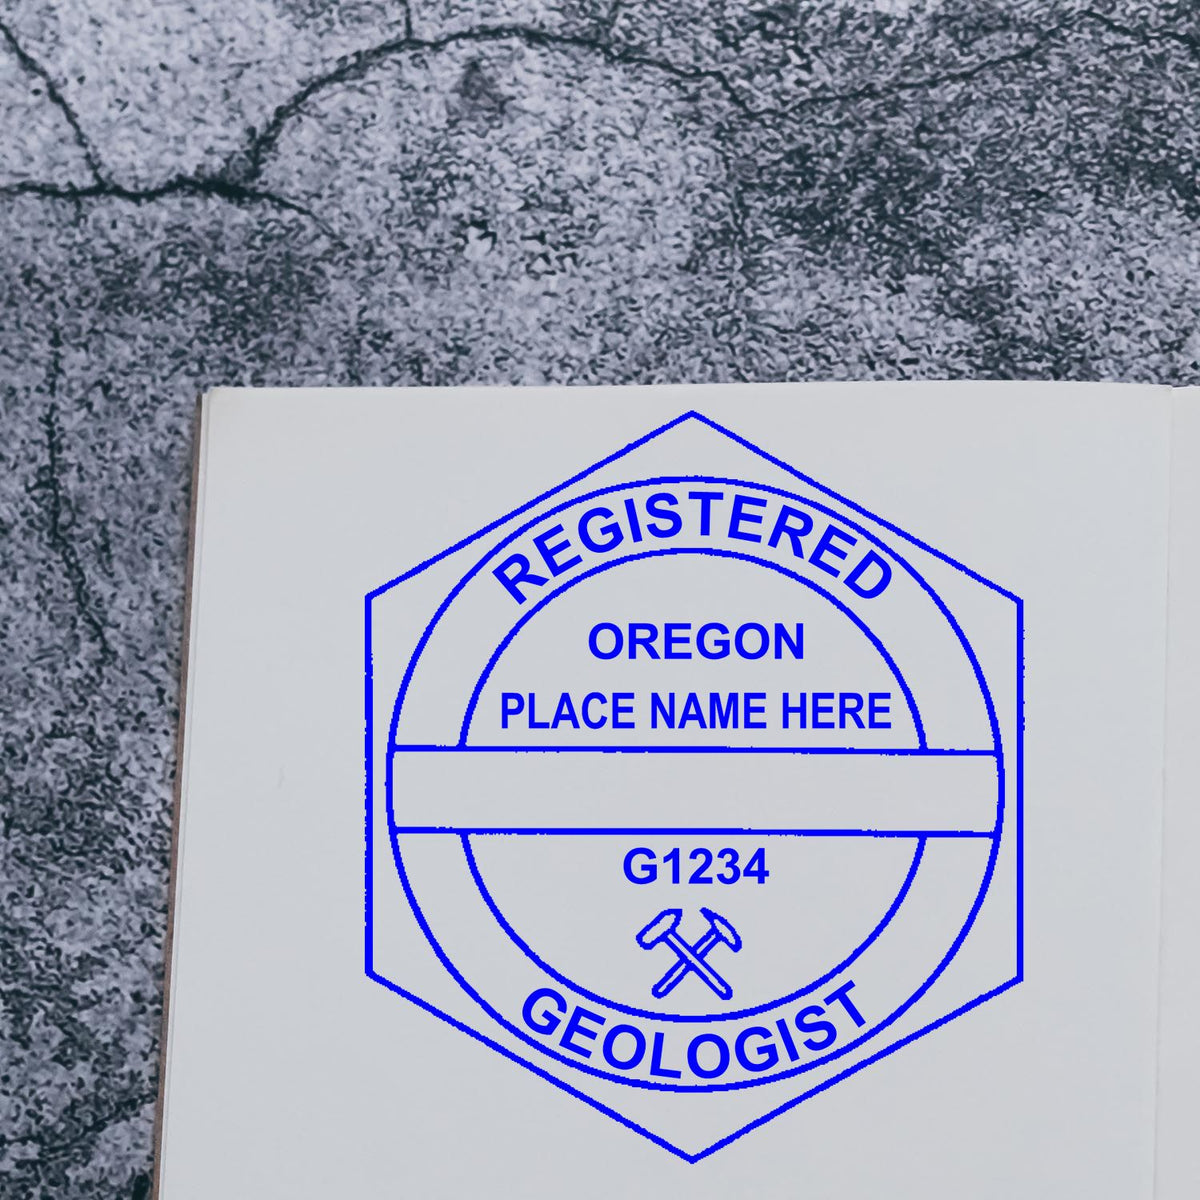 A lifestyle photo showing a stamped image of the Digital Oregon Geologist Stamp, Electronic Seal for Oregon Geologist on a piece of paper